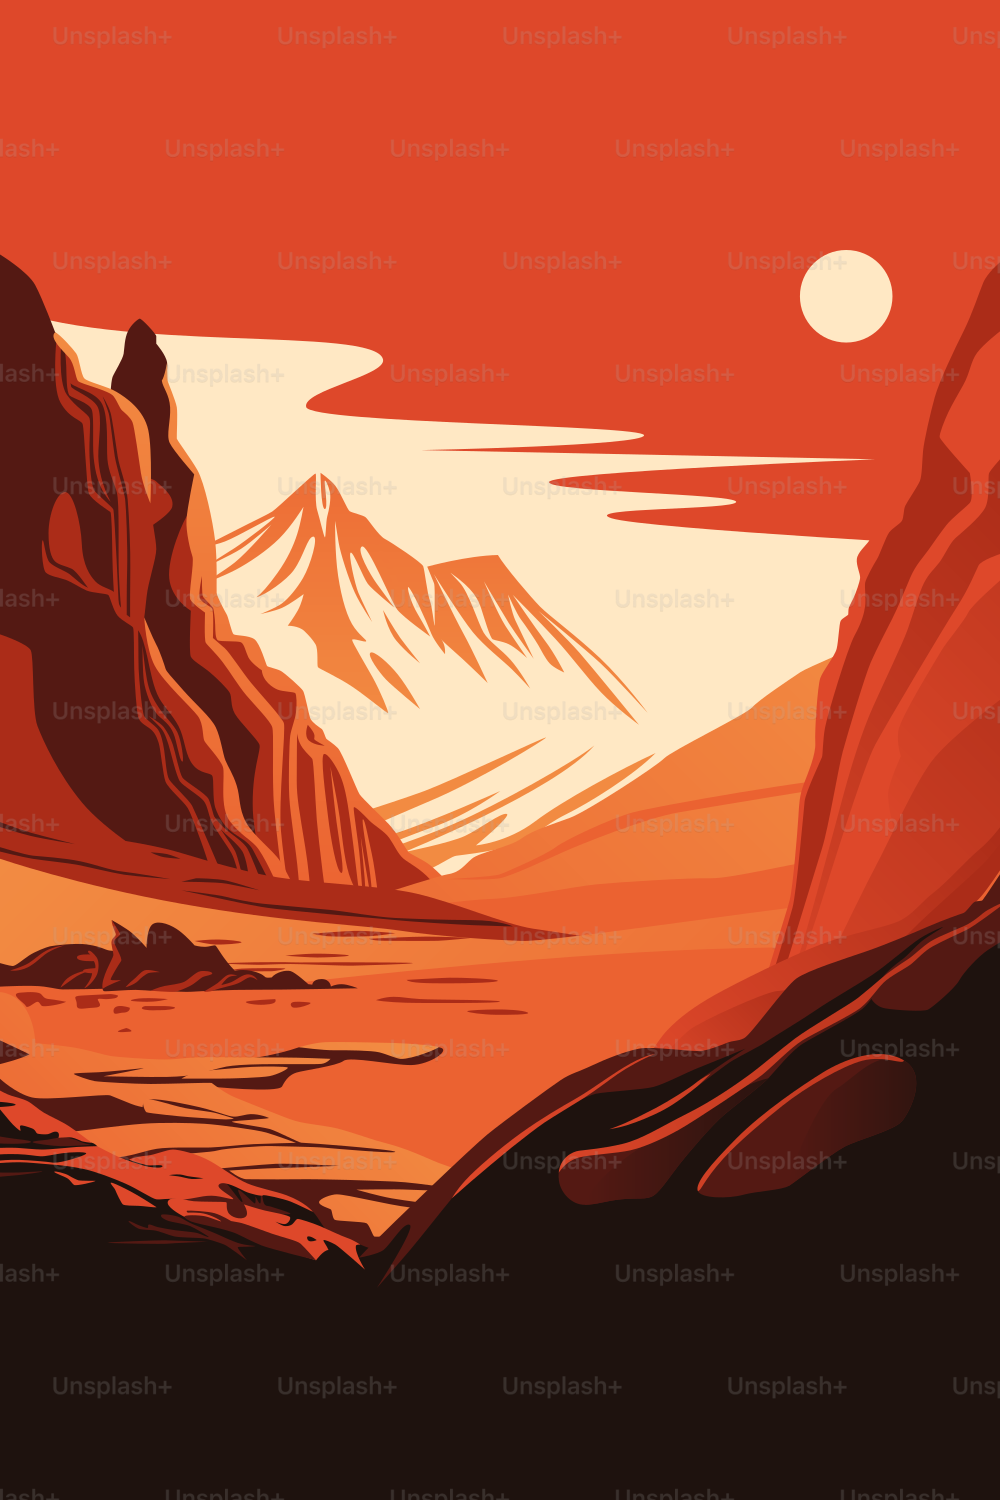 Mars Poster. Human Solar System Exploration. Surface of the Red Planet. Distant Sun in the Skies.